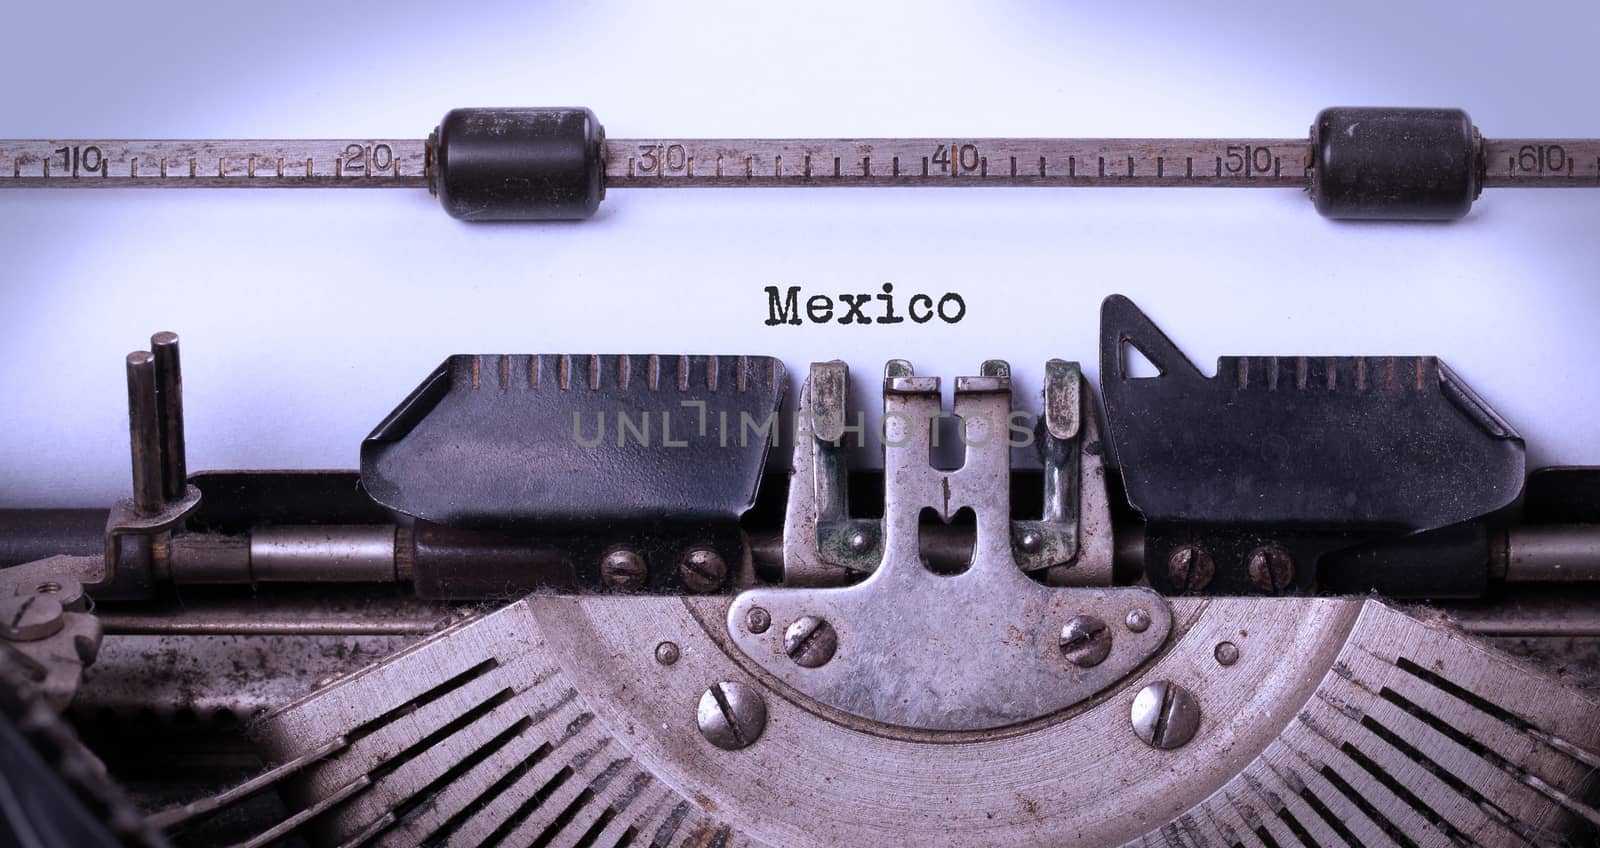 Inscription made by vintage typewriter, country, Mexico